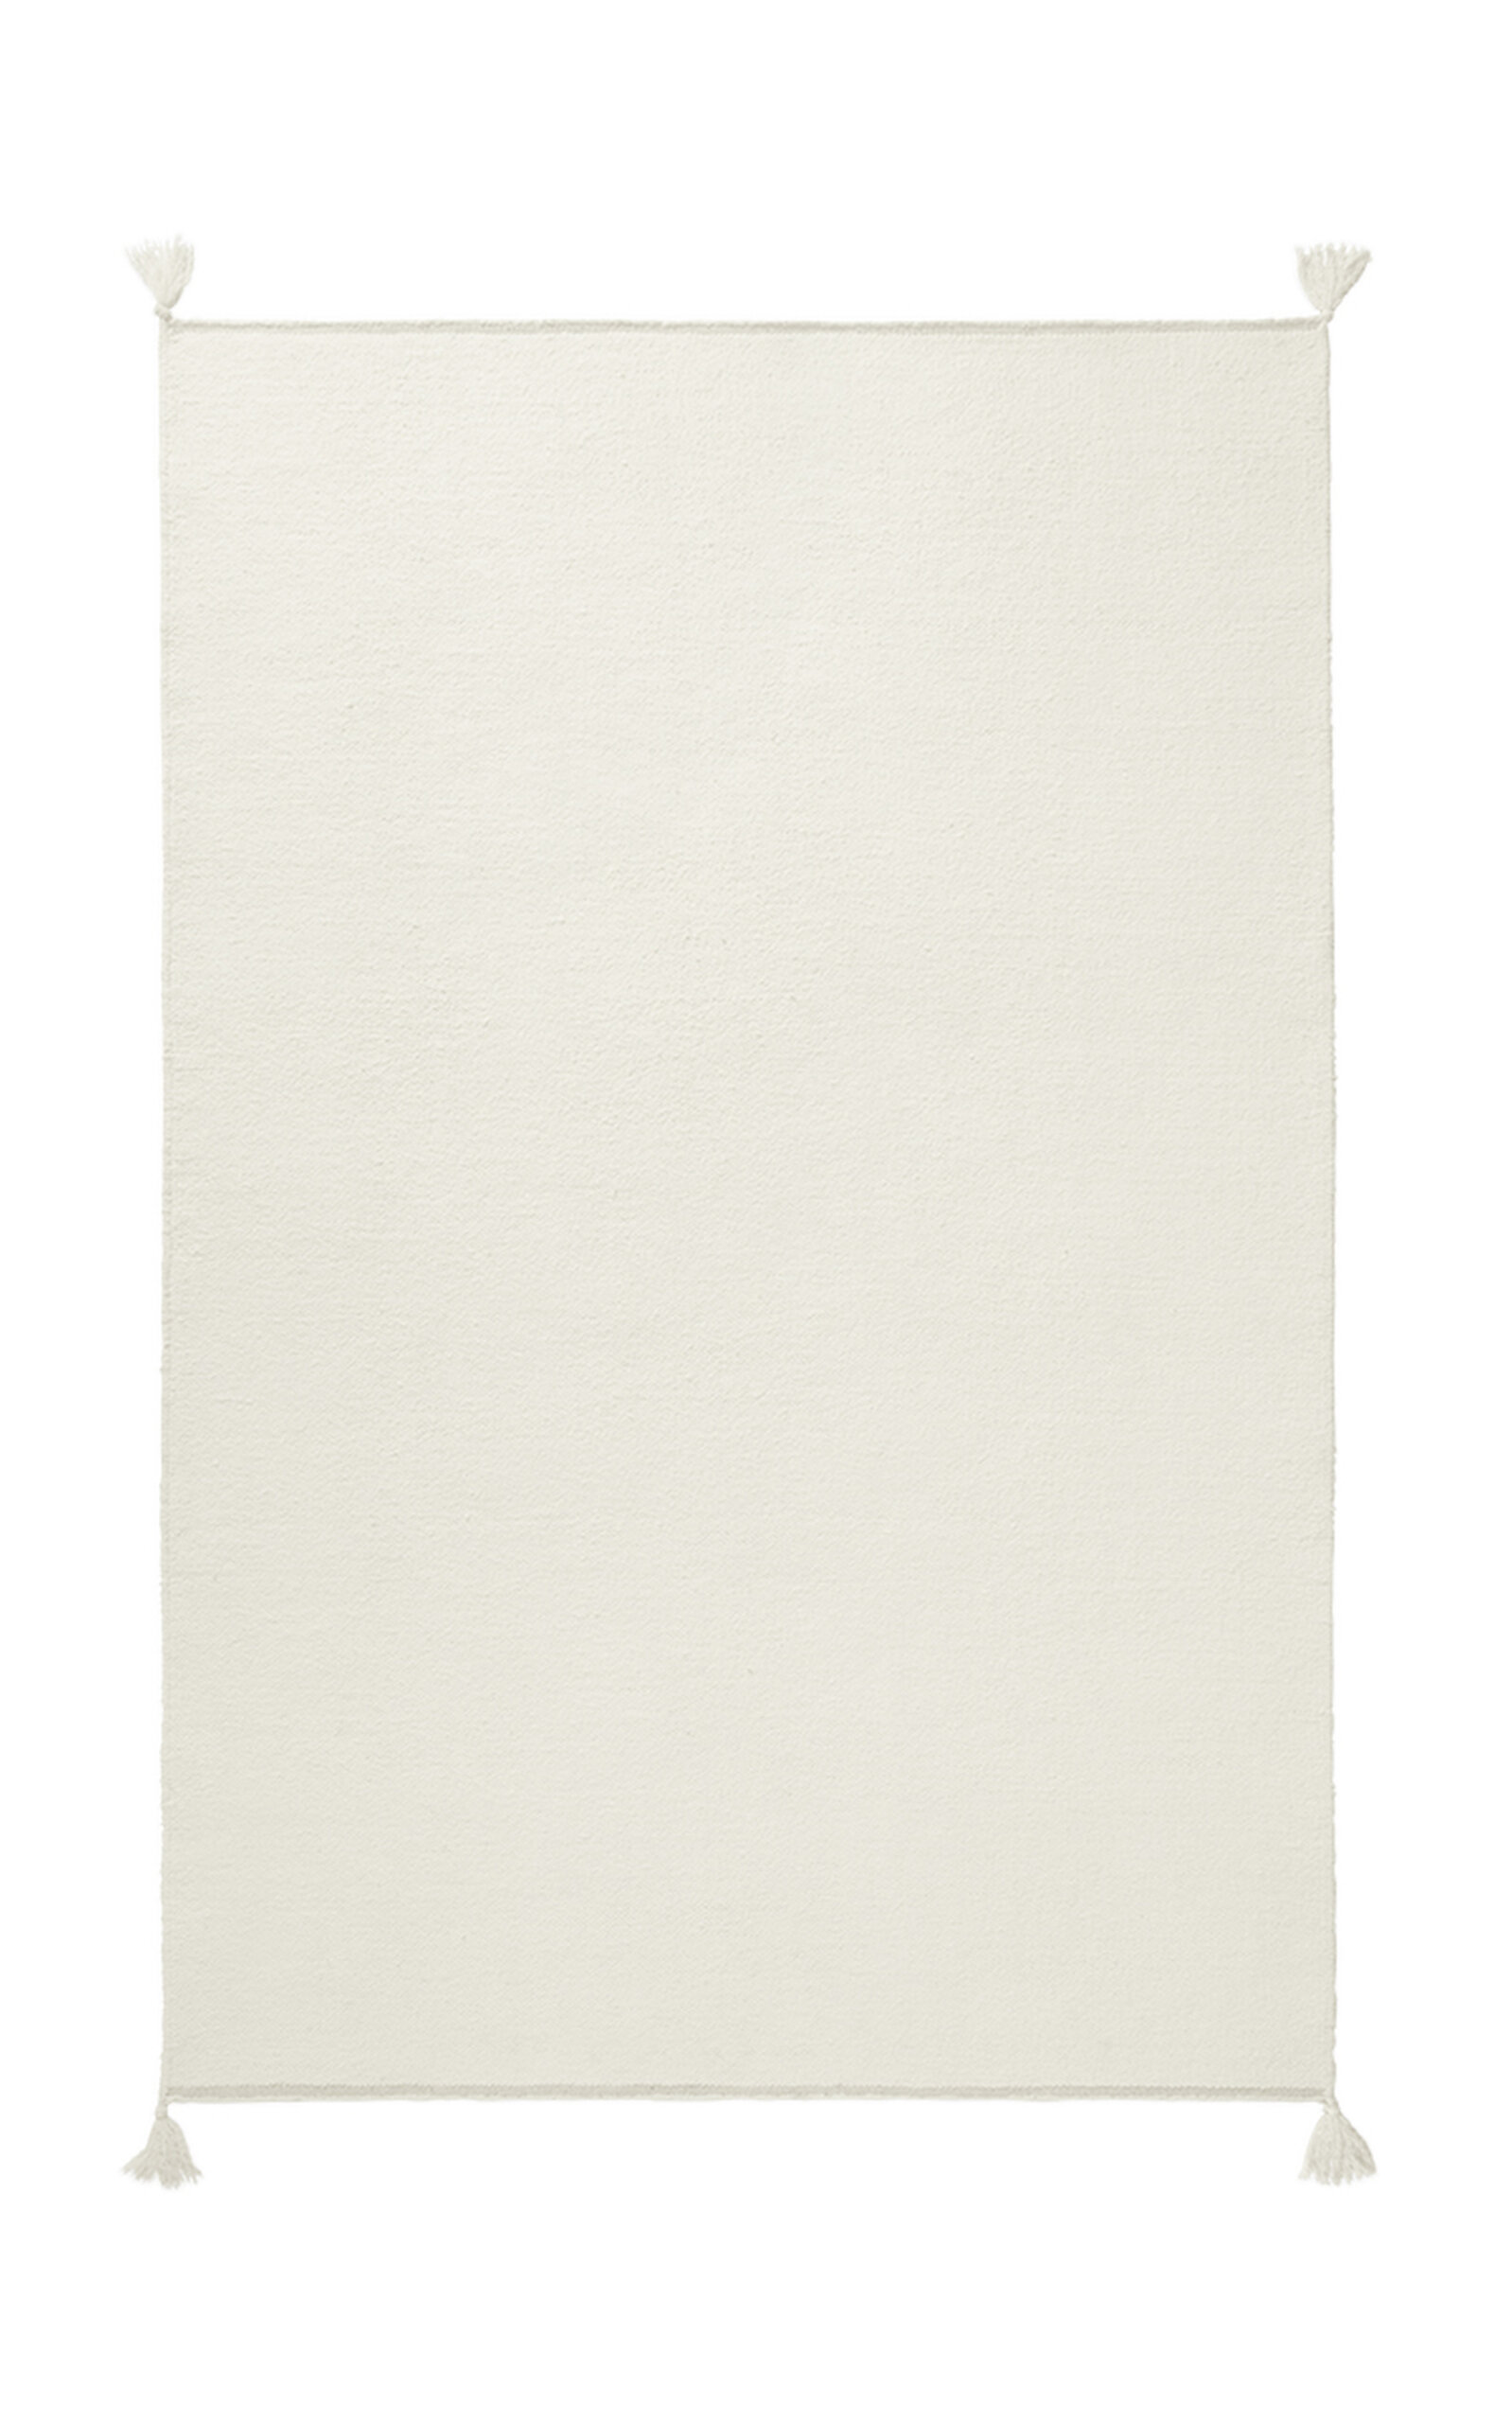 Nordic Knots Merino By ; Flatweave Area Rug In Natural White; Size 8' X 10' In Off-white